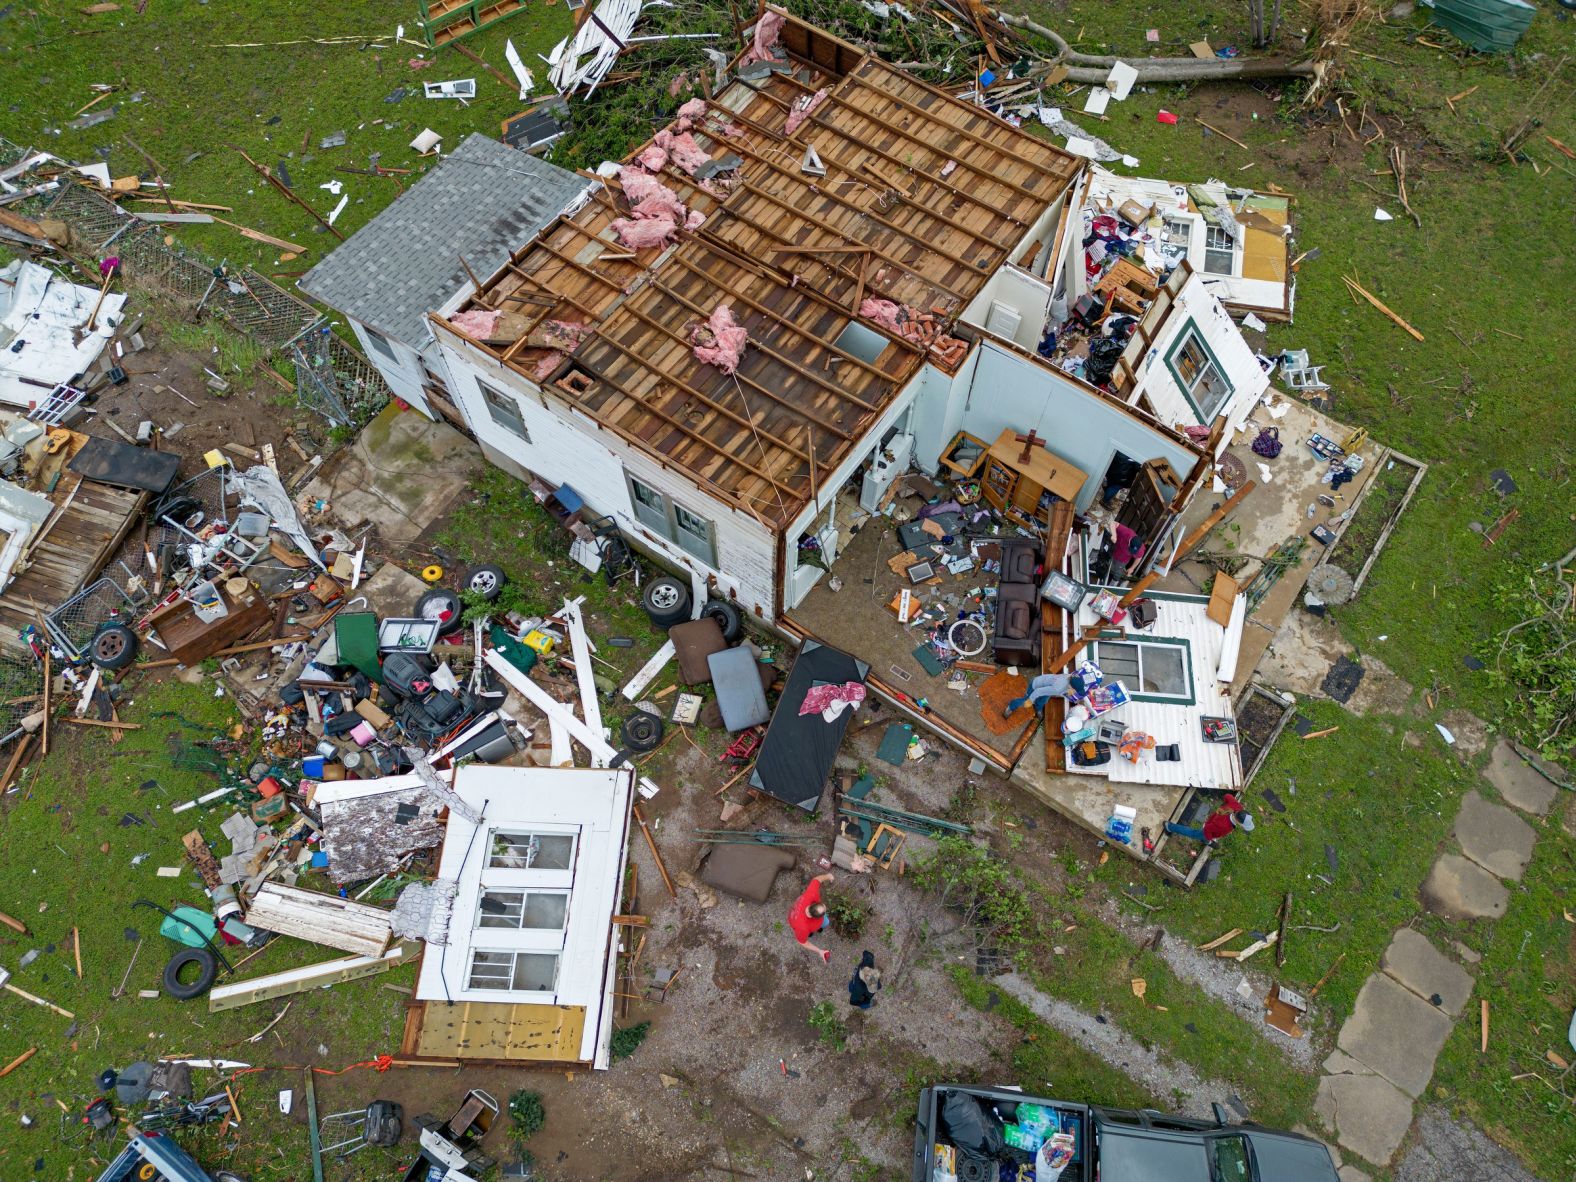 This home in Sulphur, Oklahoma, was heavily damaged by a tornado that hit on Saturday, April 27. At least four people were killed in Oklahoma after an <a href="index.php?page=&url=https%3A%2F%2Fwww.cnn.com%2F2024%2F04%2F28%2Fweather%2Fplains-midwest-storms-tornadoes-climate-sunday%2Findex.html" target="_blank">overnight tornado outbreak</a>.